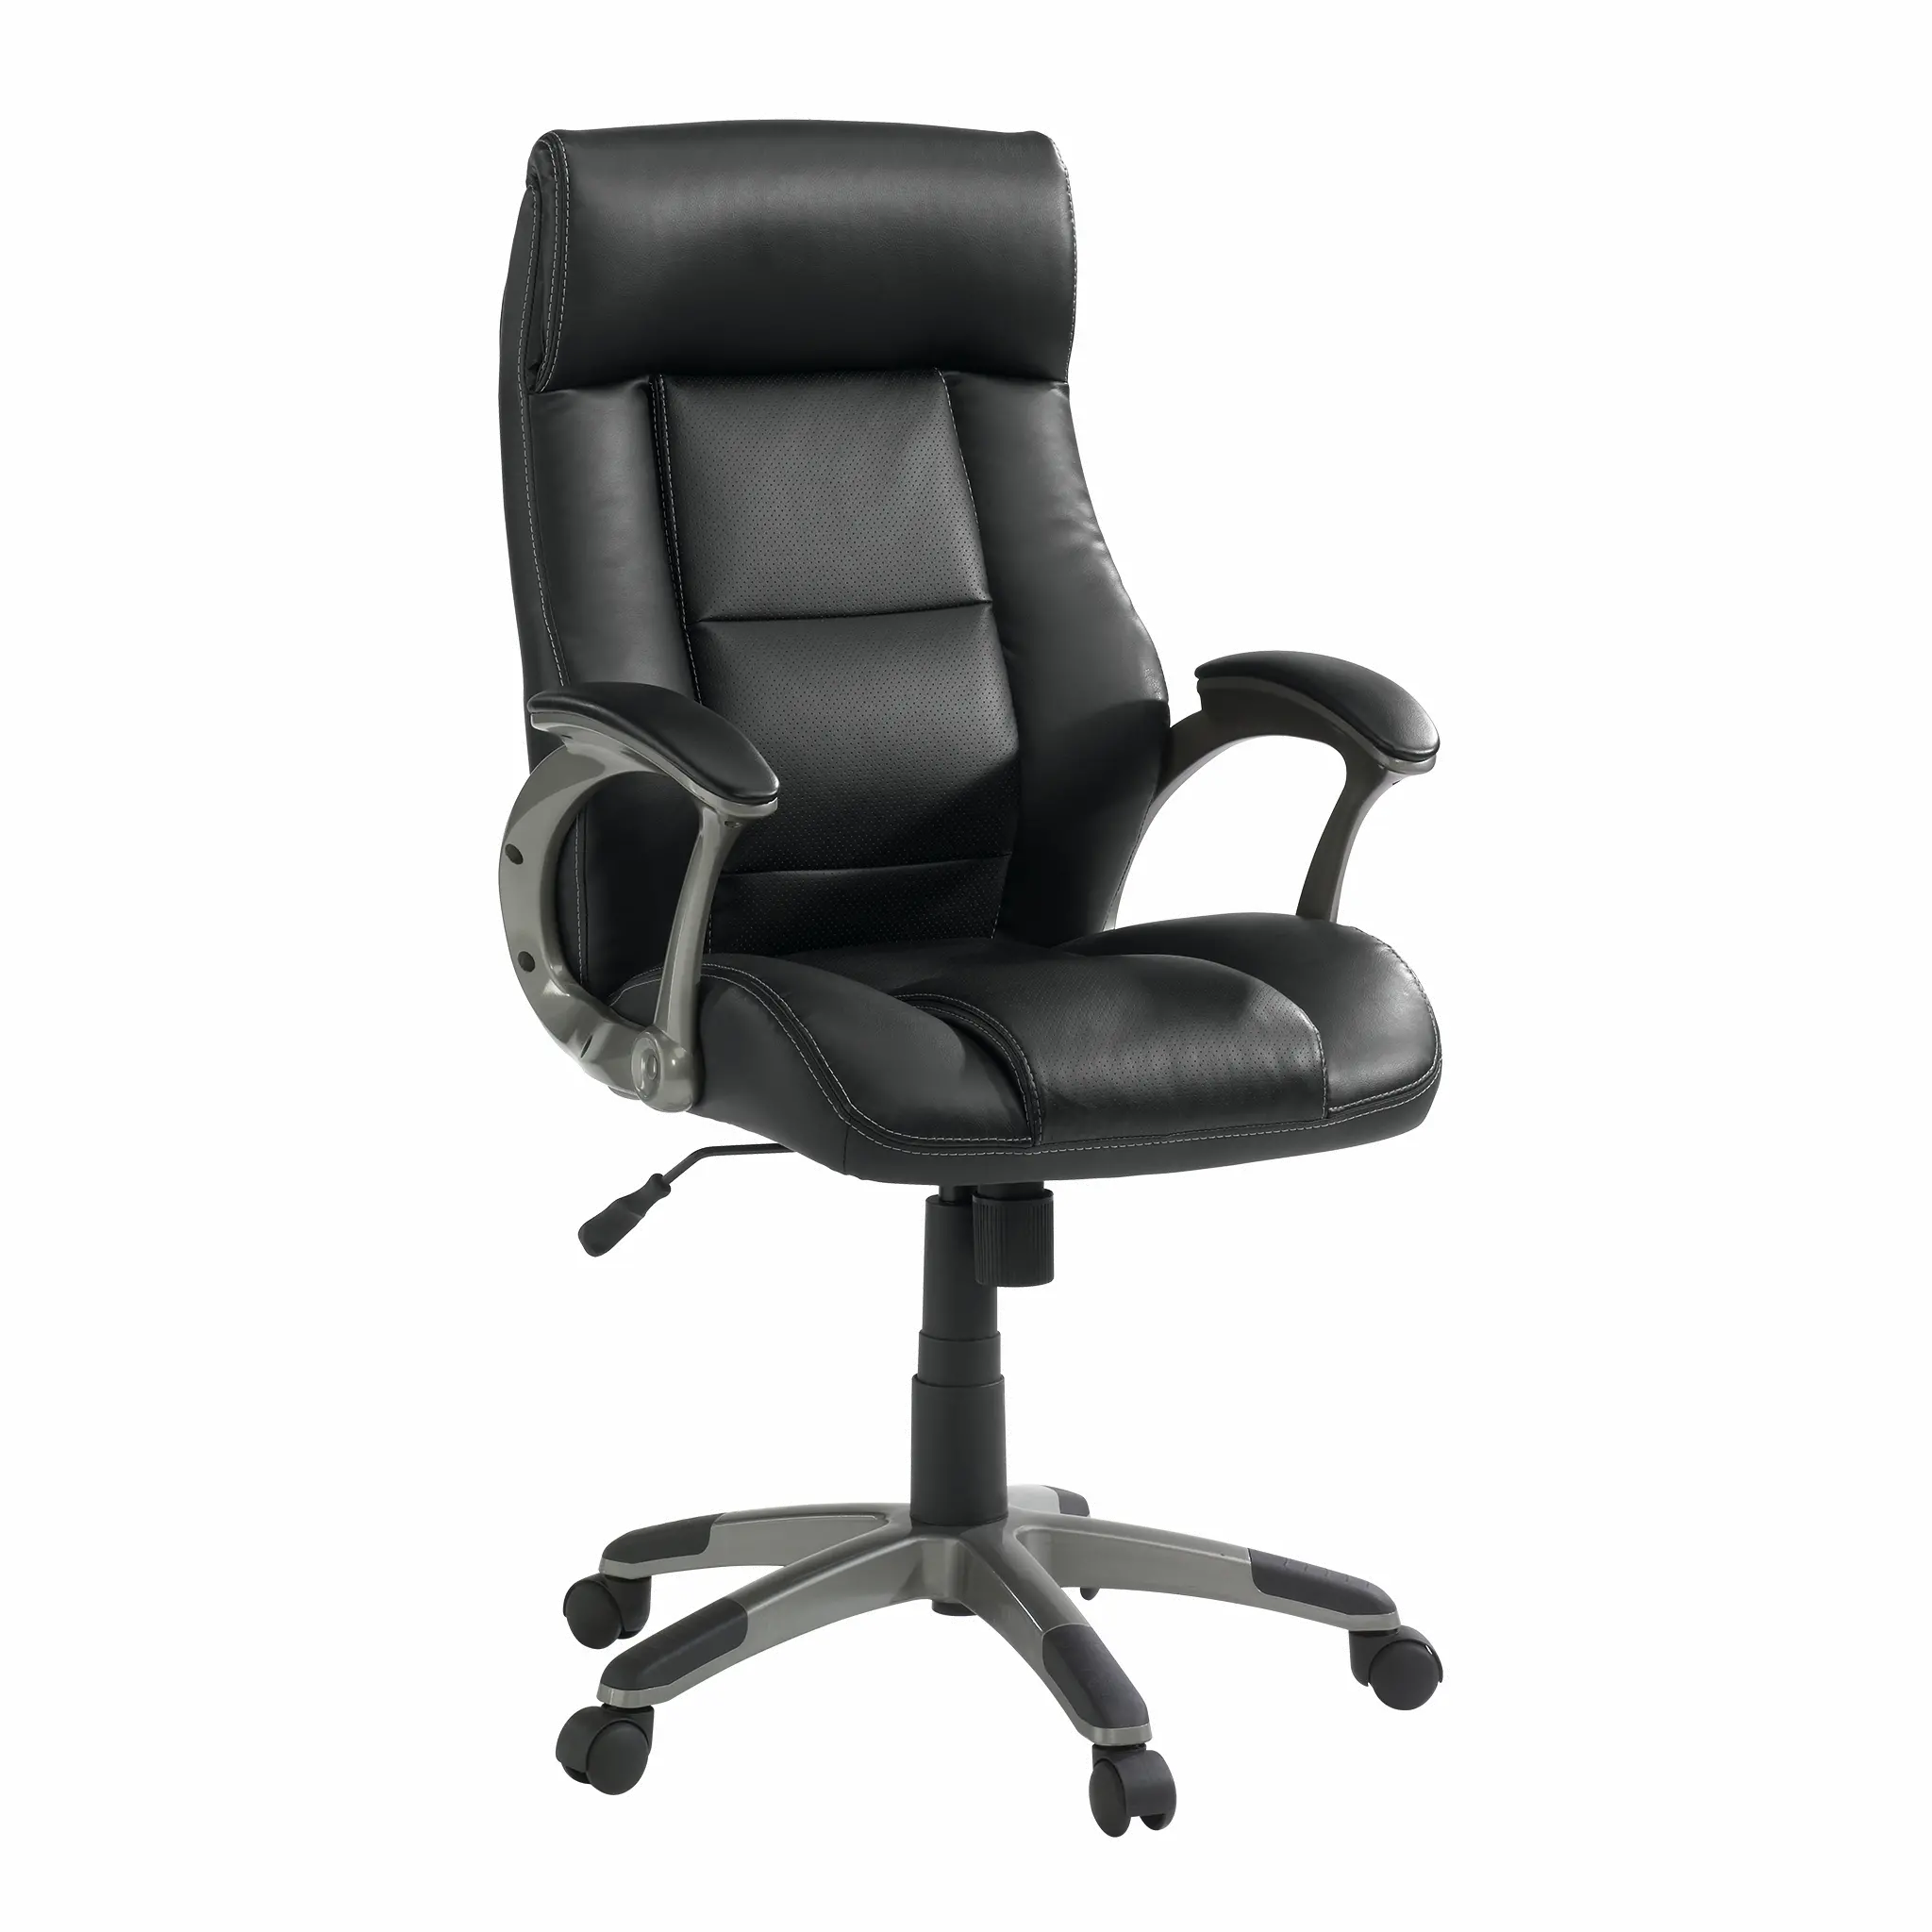 Black Managers Chair - Gruga